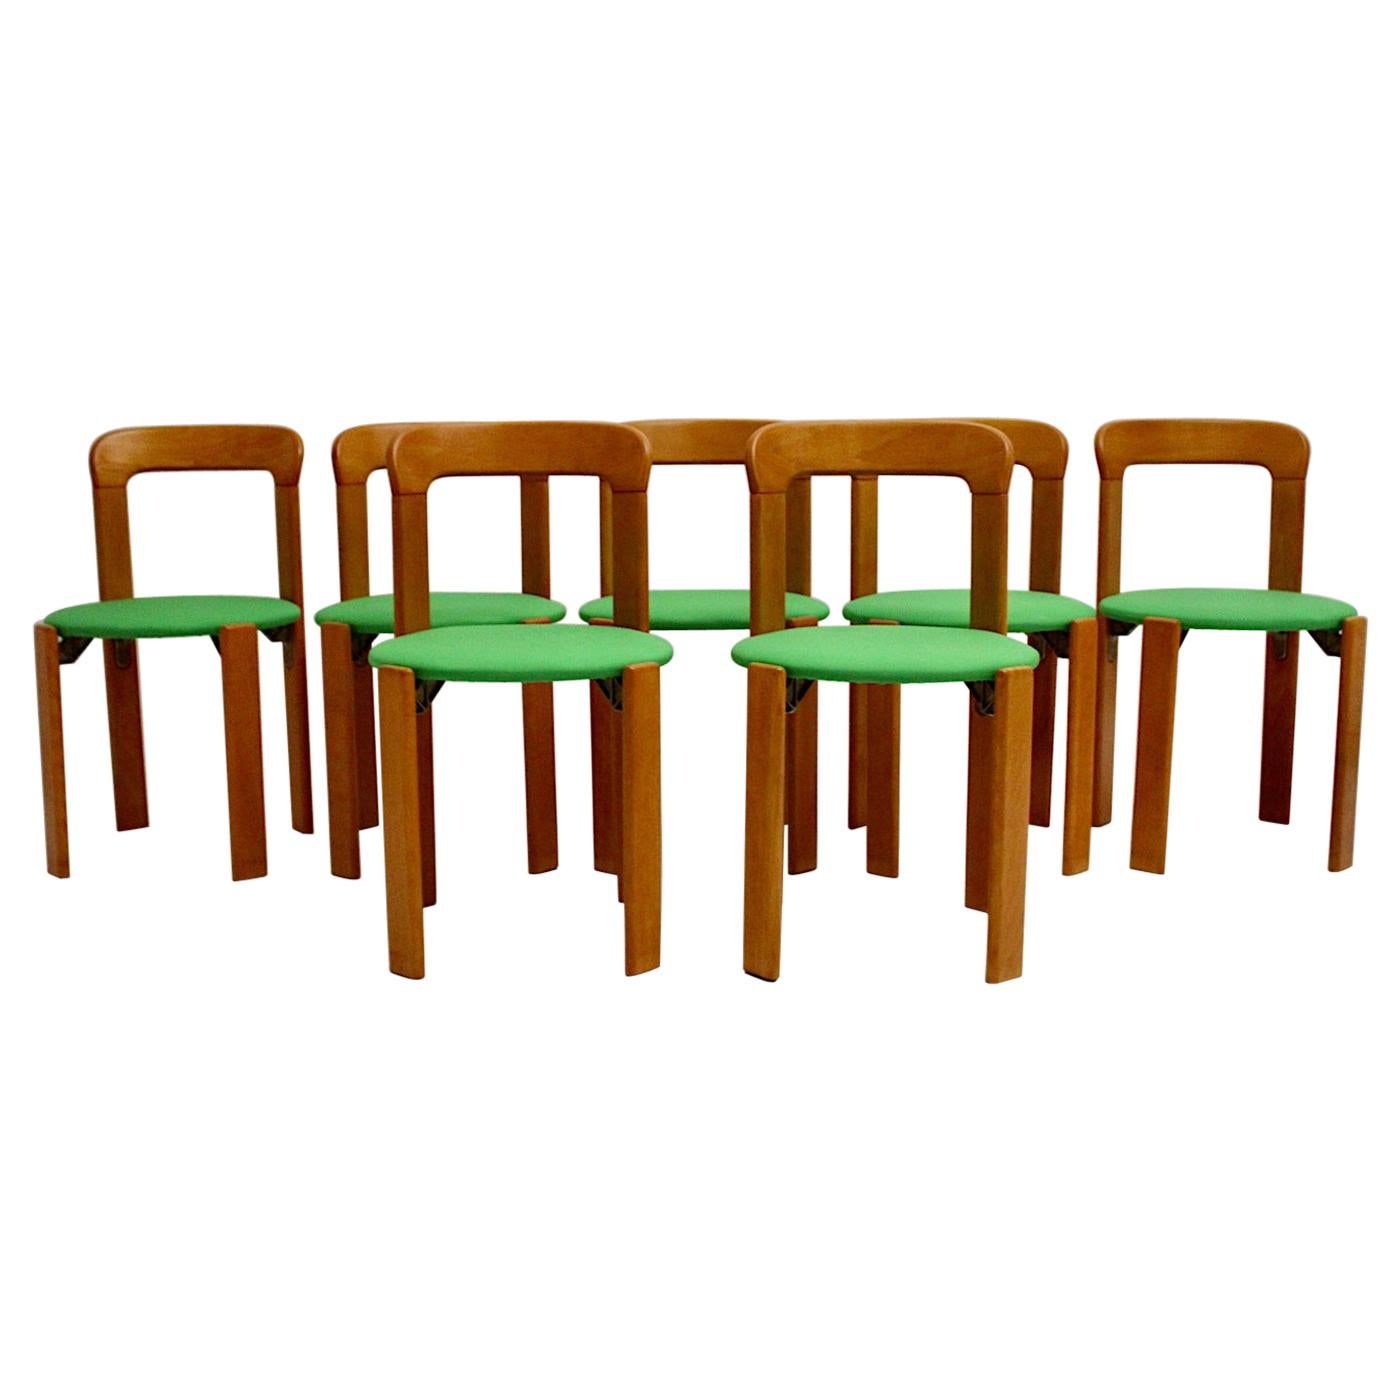 Mid-Century Modern Set of Seven Brown Wood Dining Room Chairs by Bruno Rey 1970s